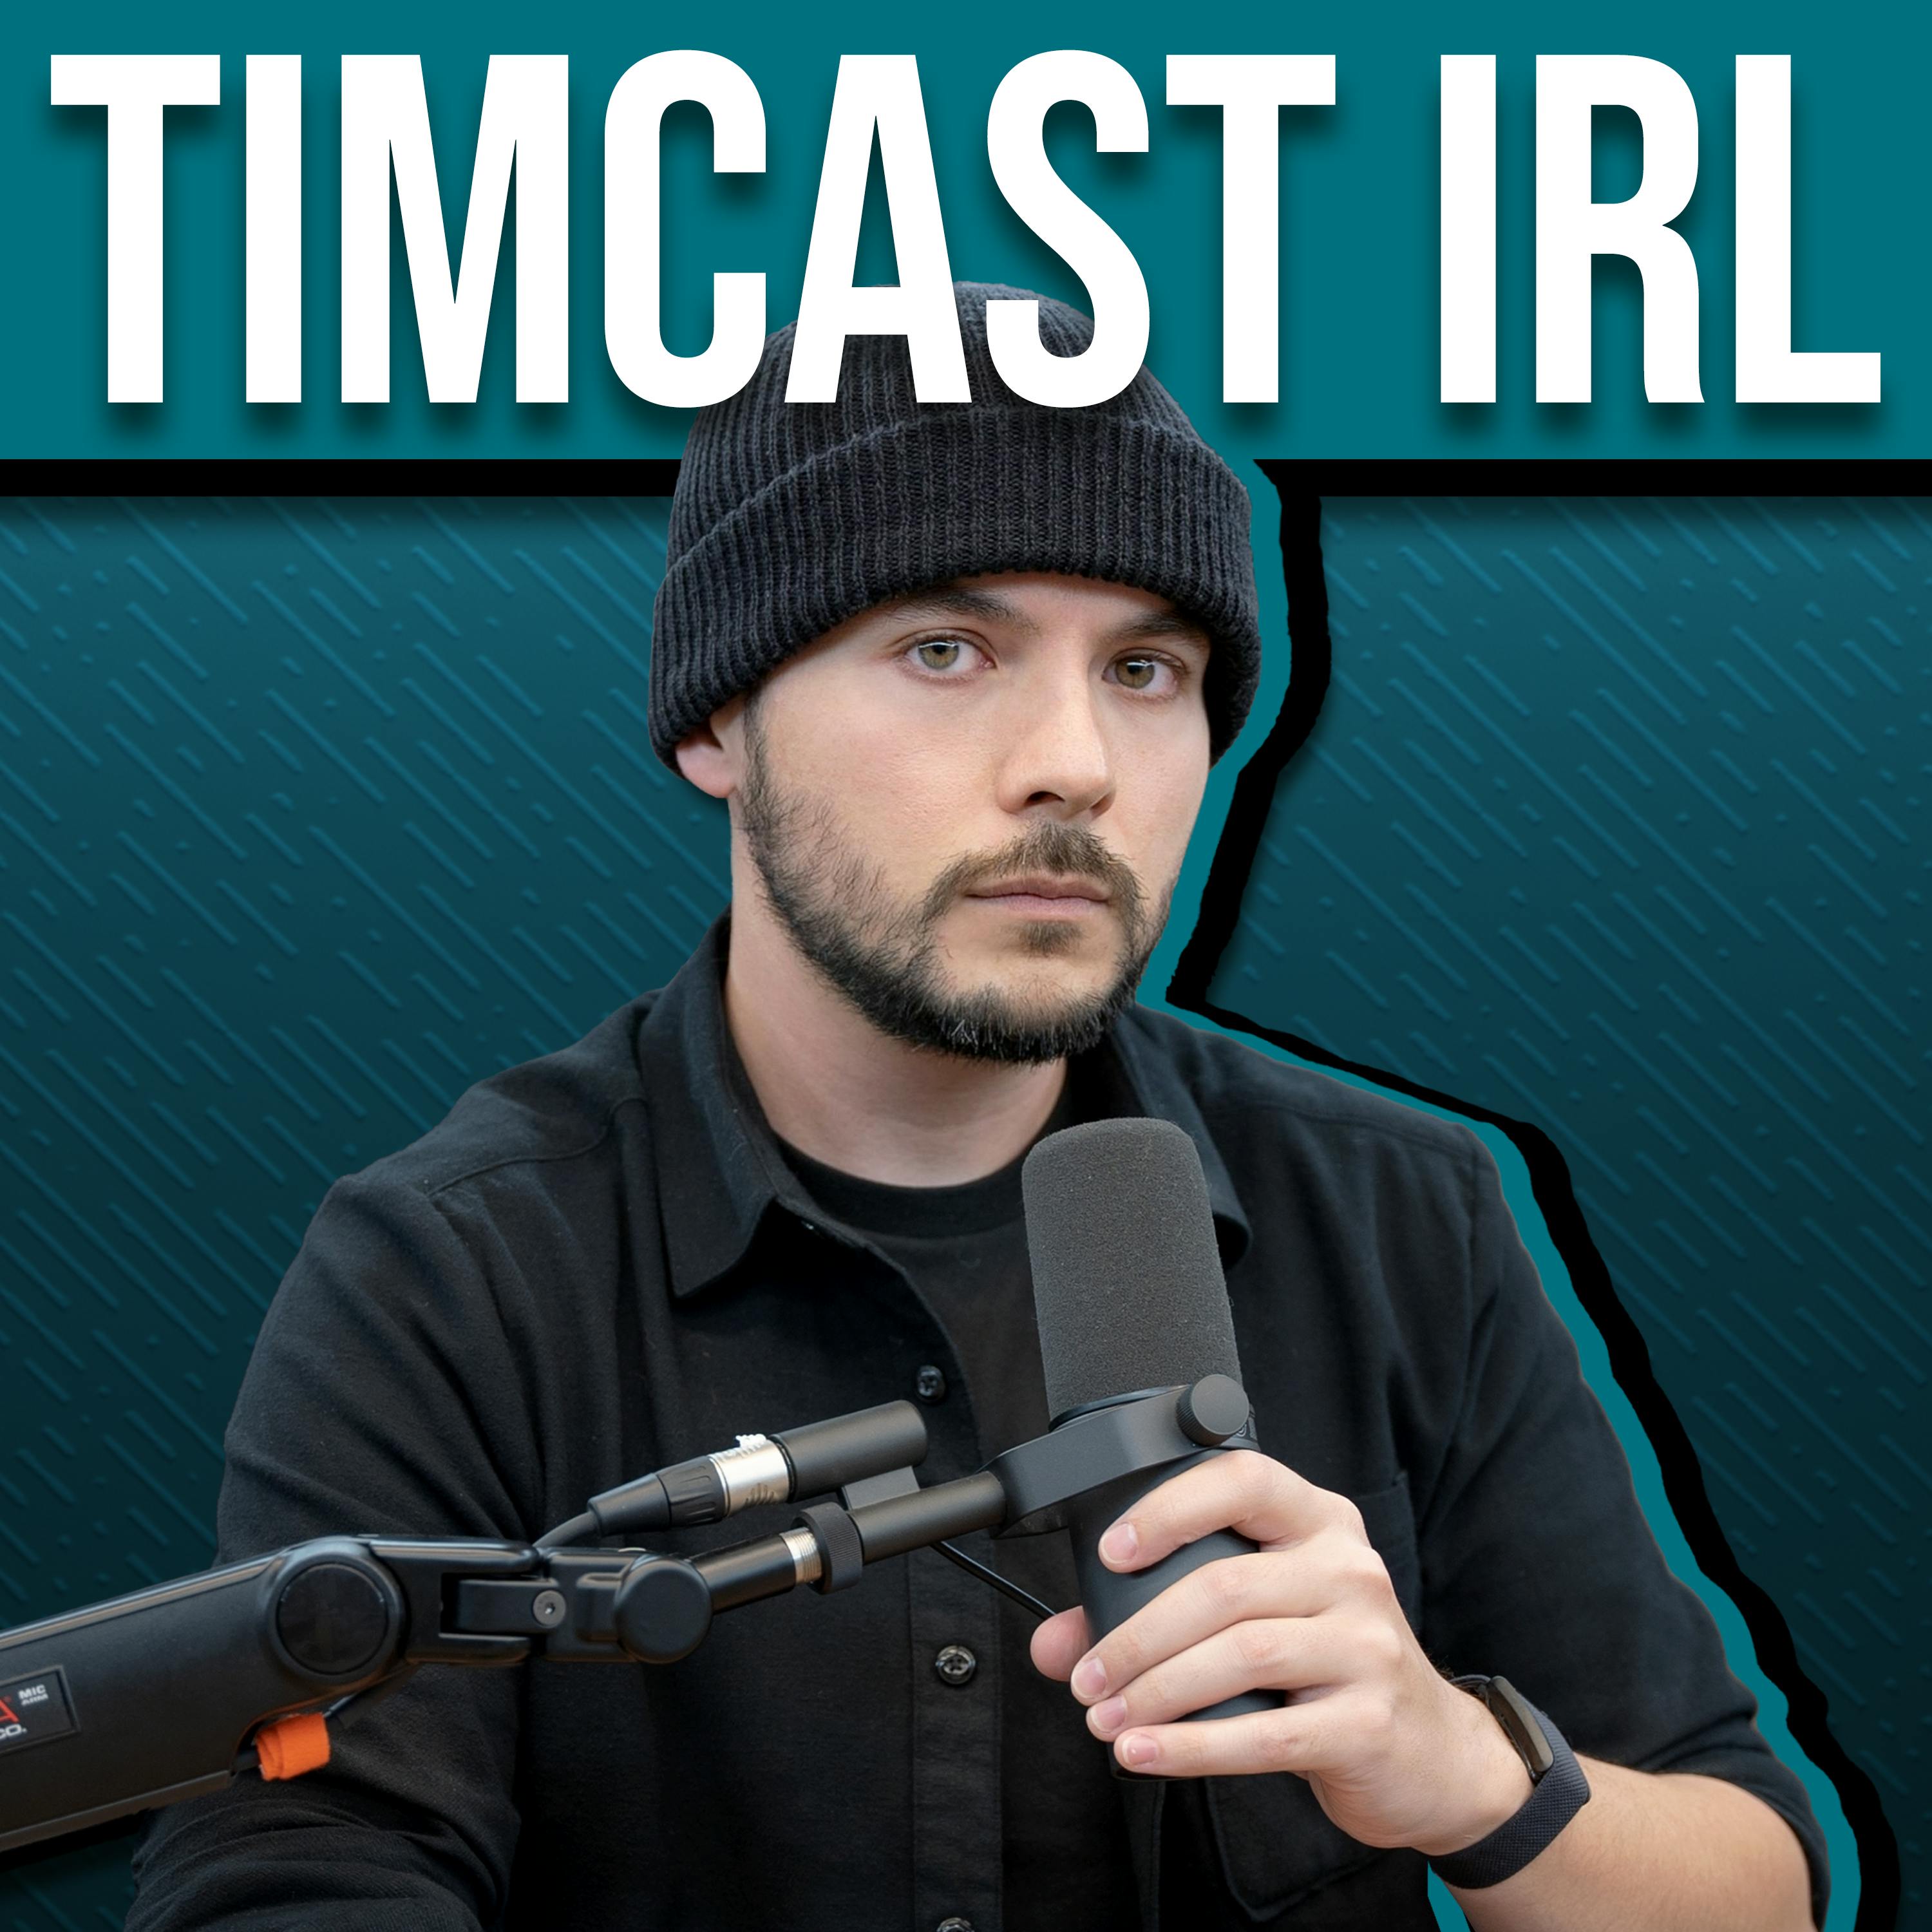 Timcast IRL #1031 Biological ATTACK On Republican HQ In DC Sparks LOCKDOWN w/Chase Geiser